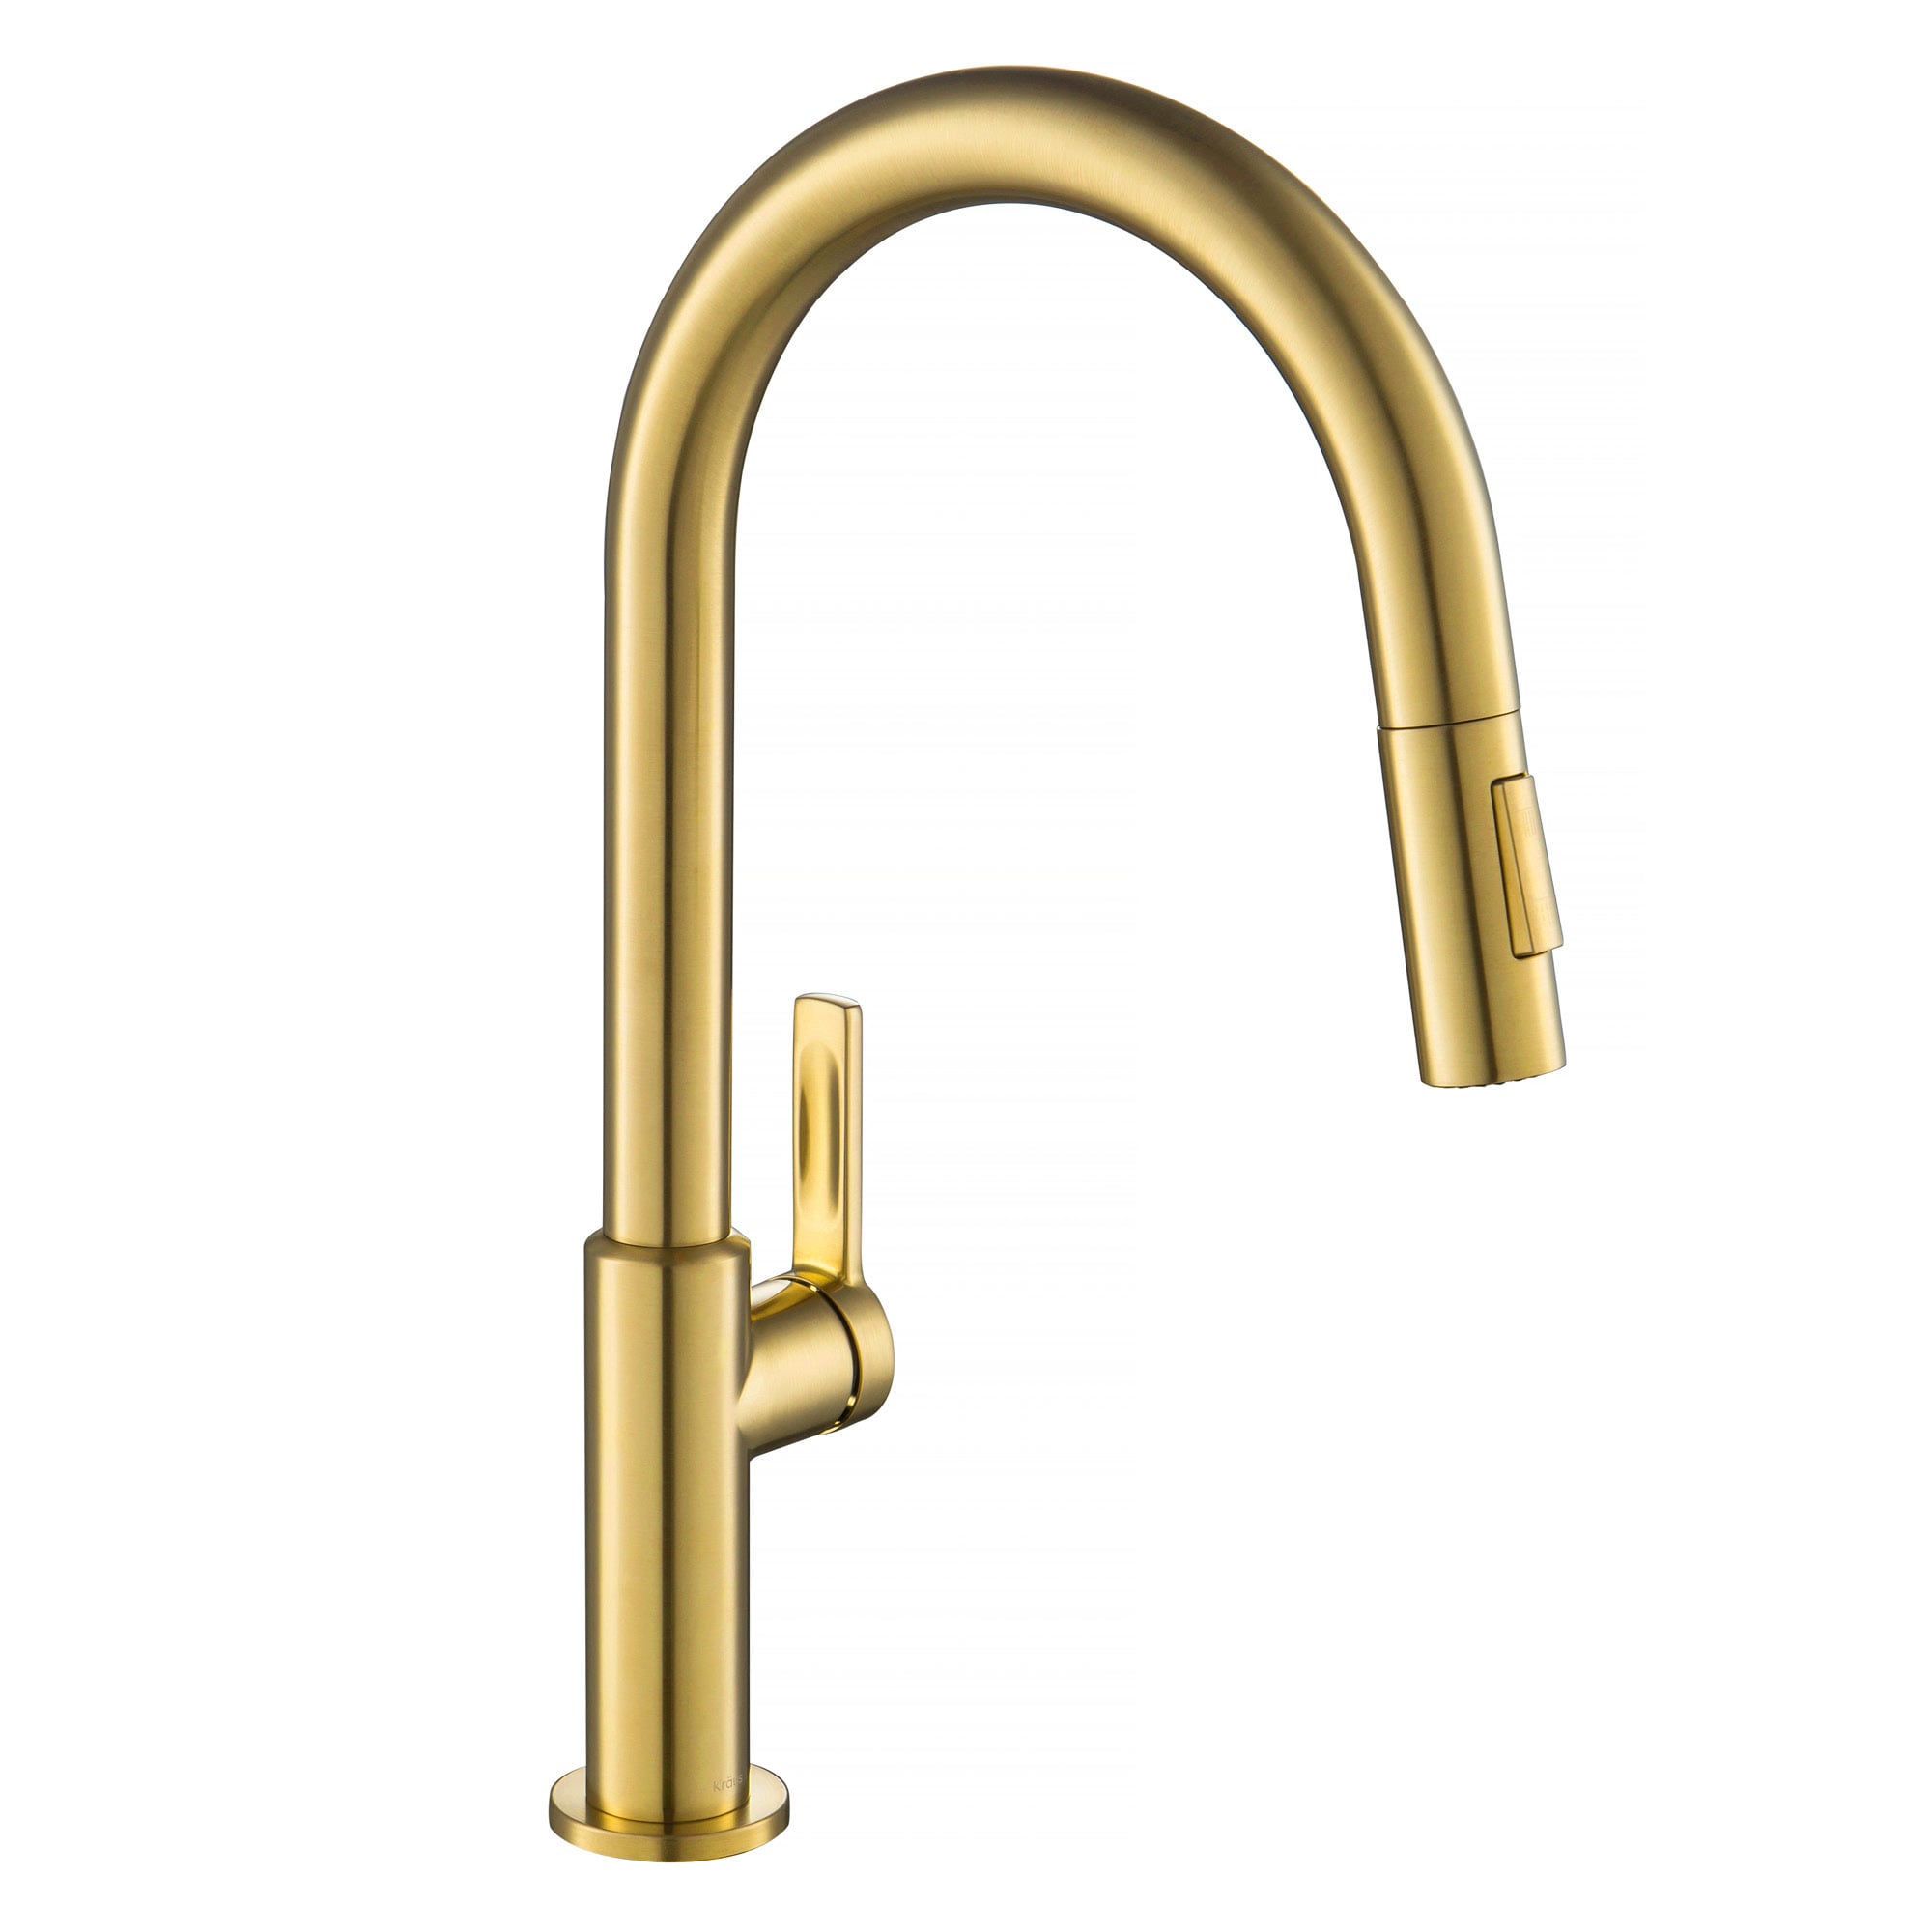 Kraus Oletto Brushed Brass Single Handle Pull-down Kitchen Faucet